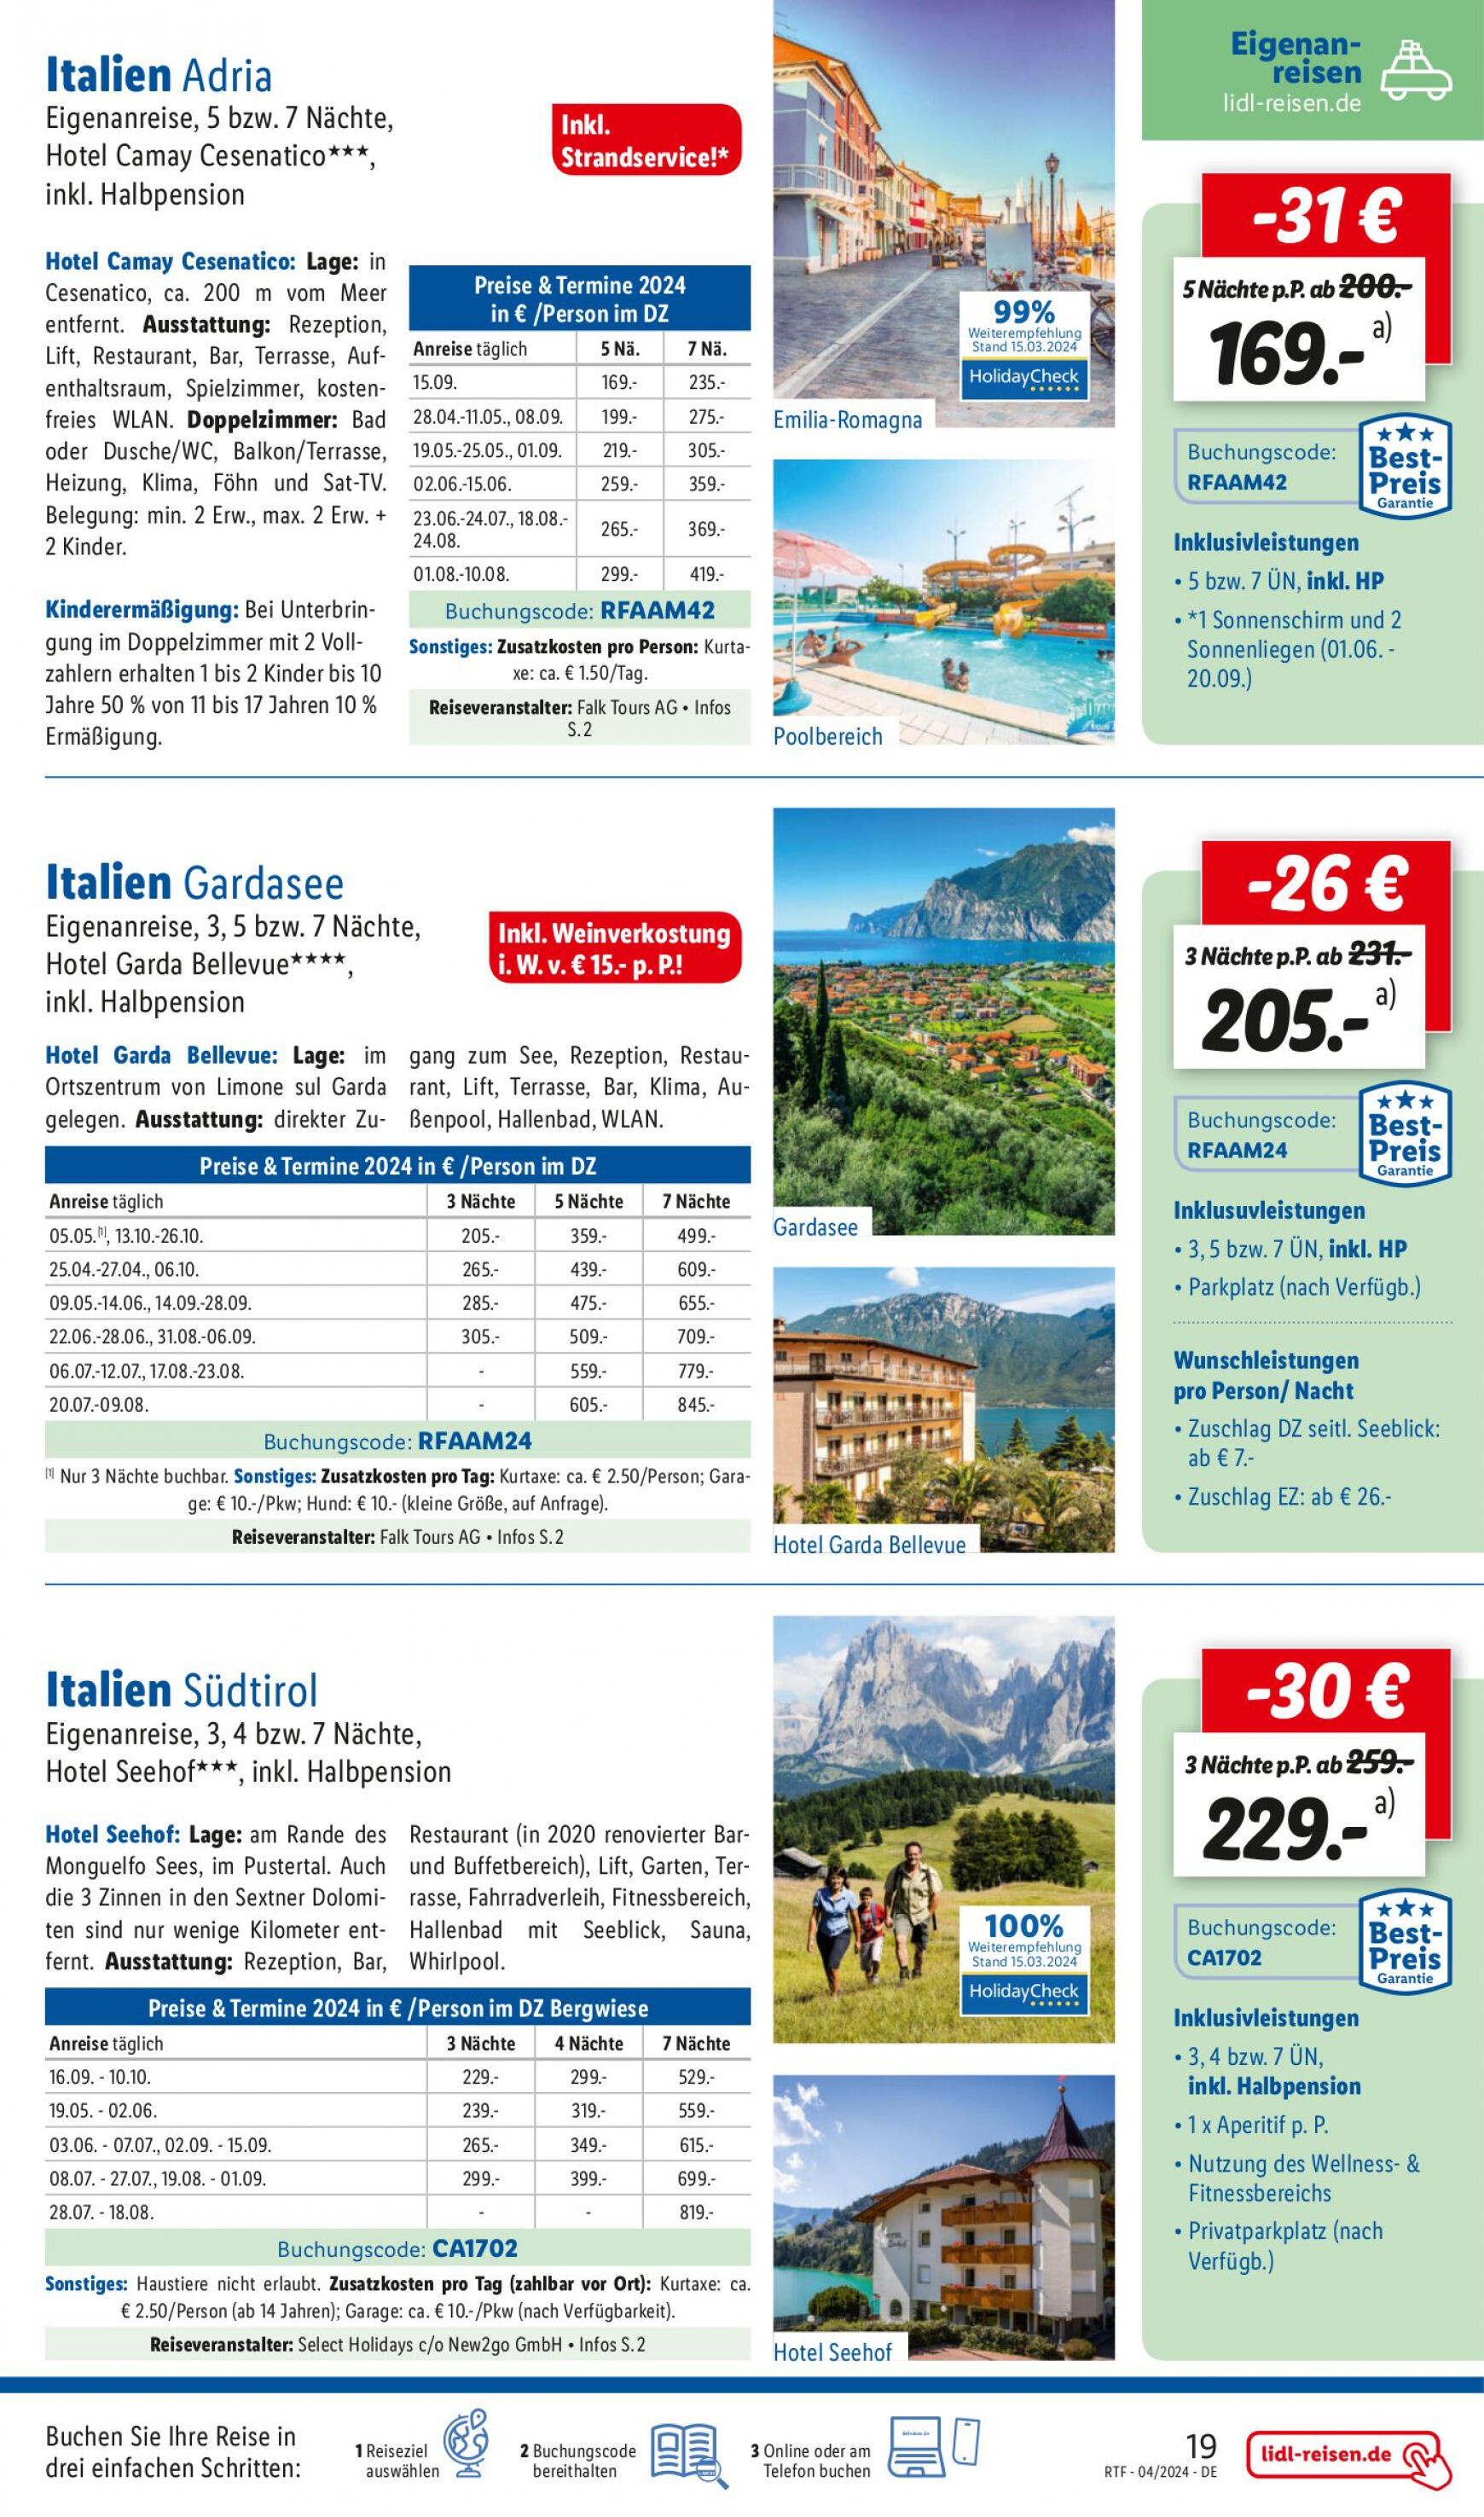 lidl - Flyer Lidl - Sommerschnäppchen aktuell 13.04. - 15.05. - page: 19